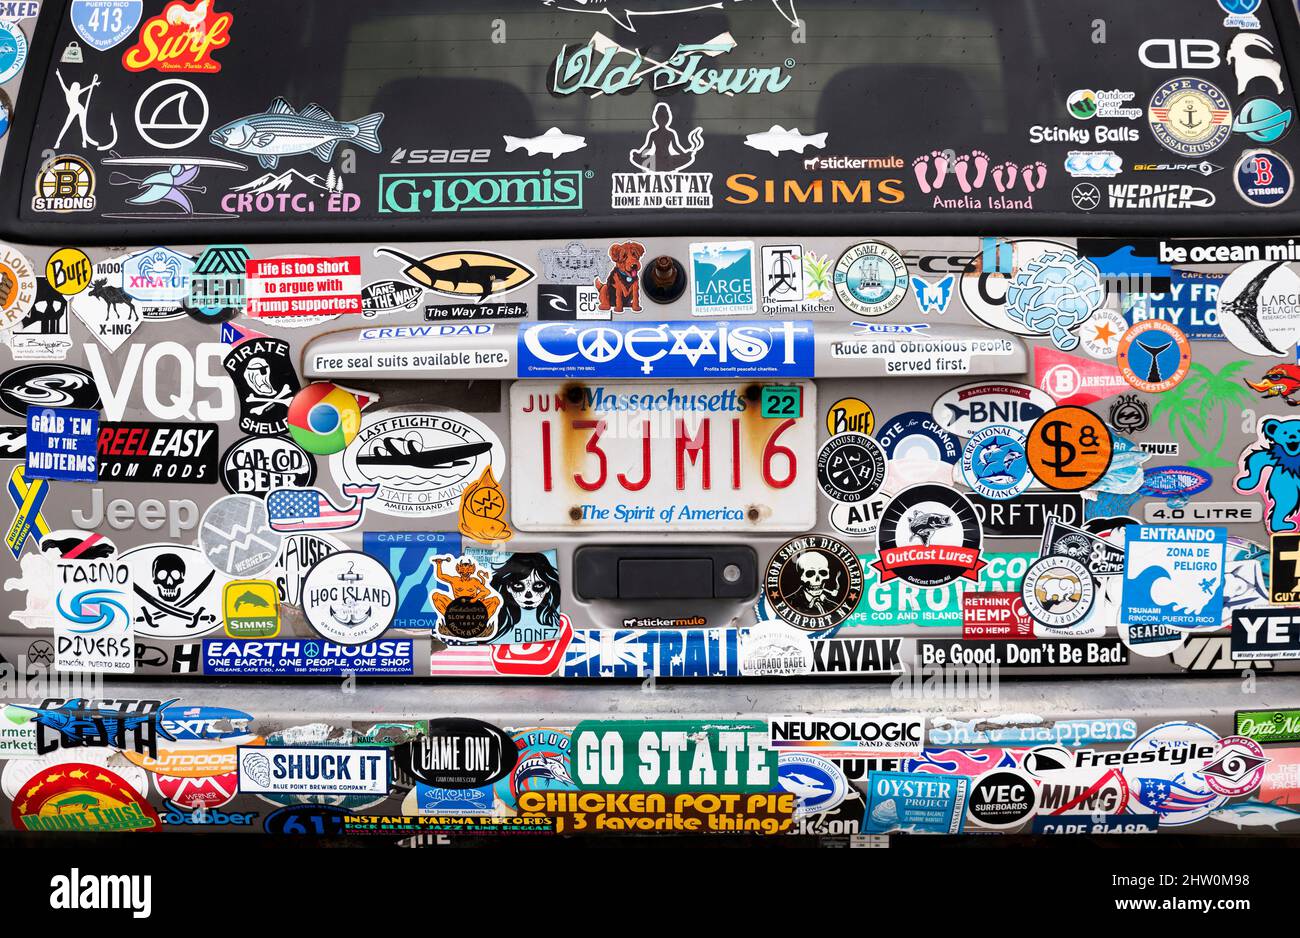 Massachusetts car with bumper stickers on display. Stock Photo